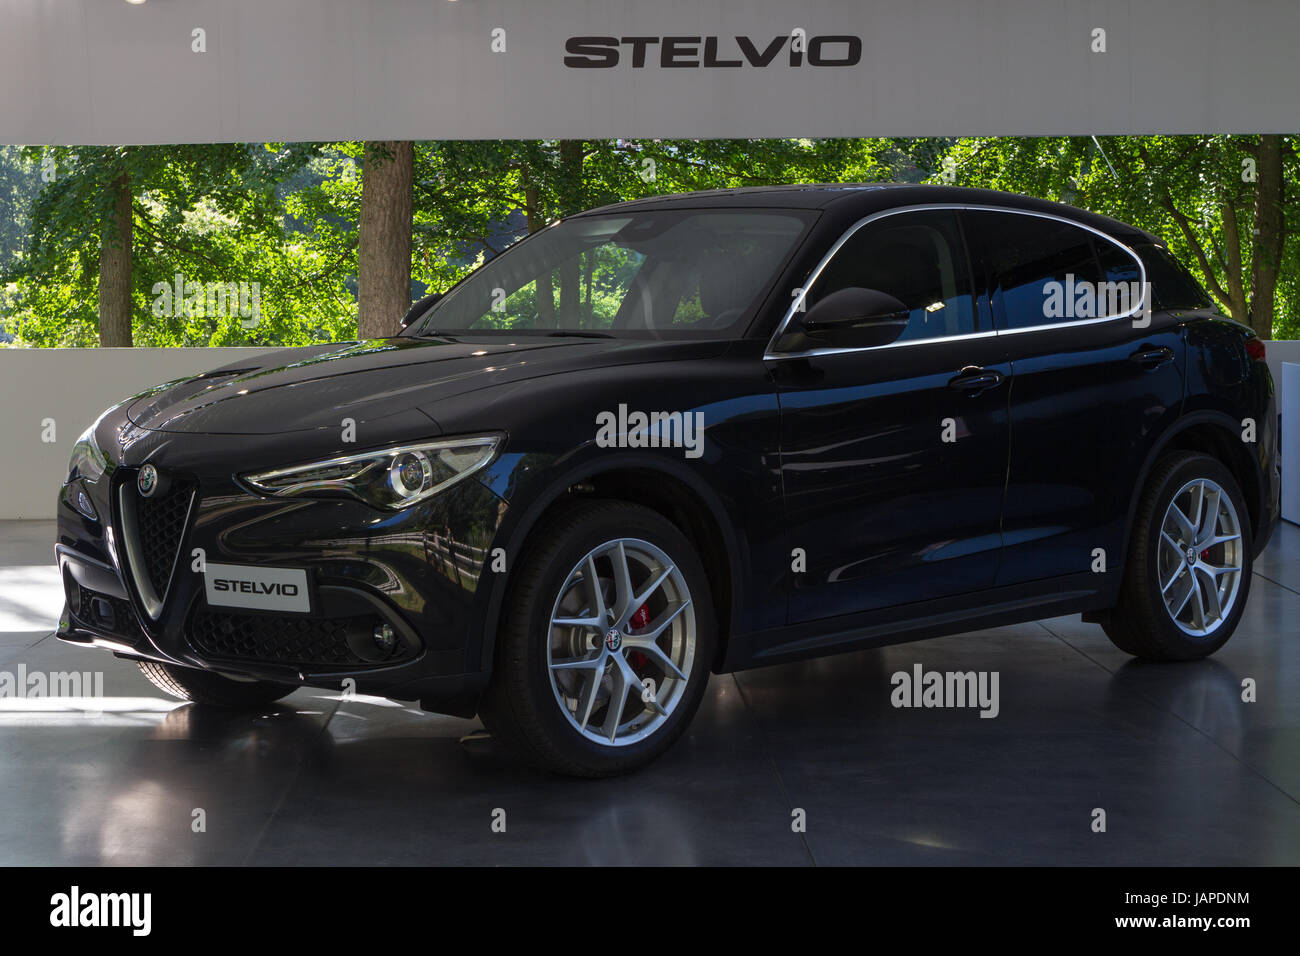 Turin, Italy, 7th June 2017. An Alfa Romeo Stelvio. Third edition of Parco Valentino car show hosts cars by many automobile manufacturers and car designers inside Valentino Park in Torino, Italy. Stock Photo